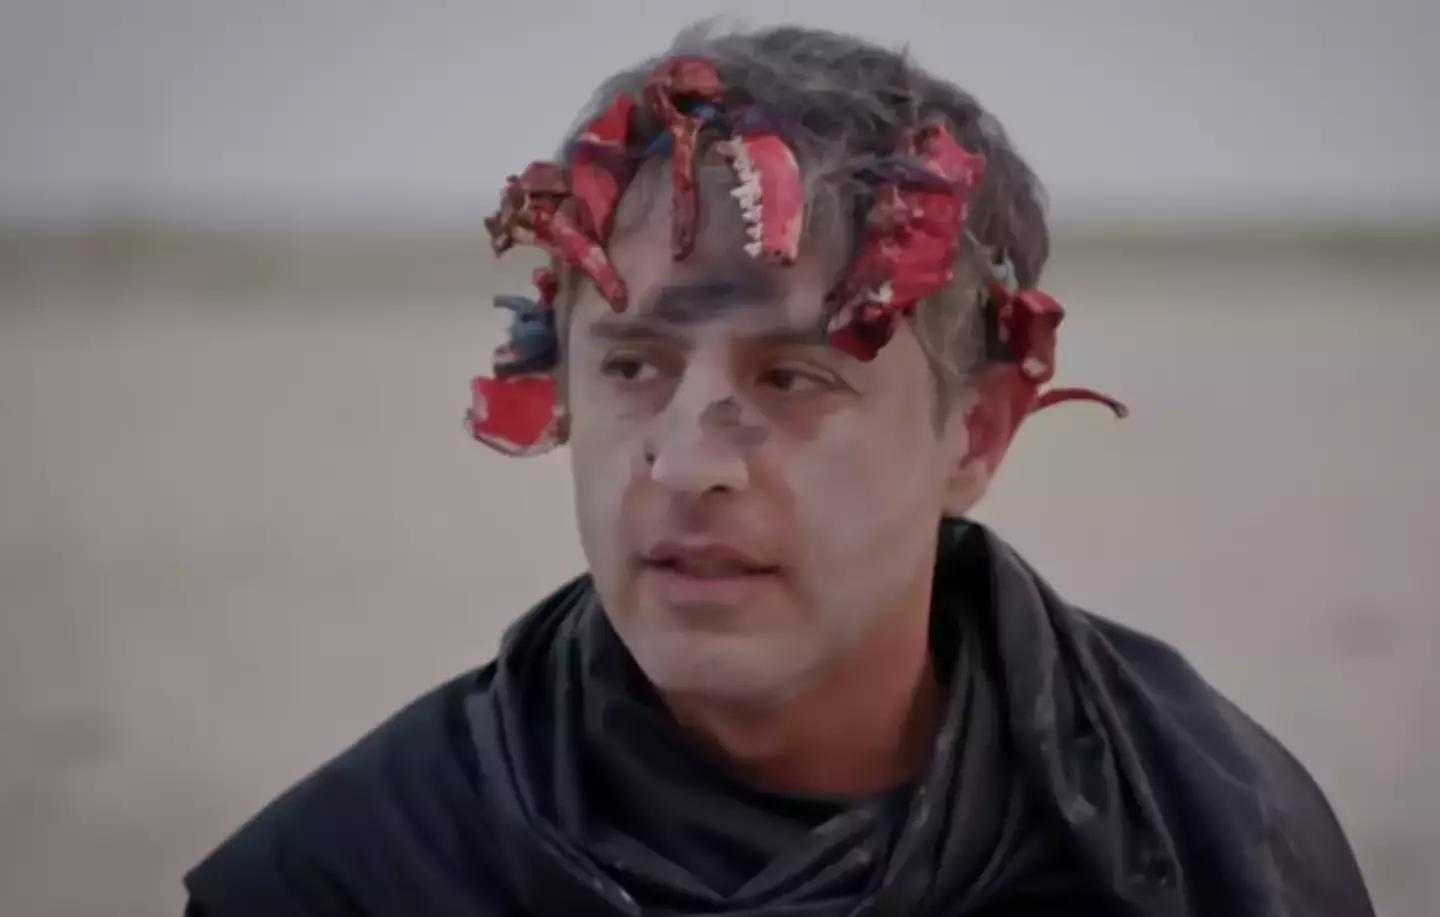 Reza Aslan visited a cannibalistic Hindu tribe and was offered to eat what was thought to be human brain.